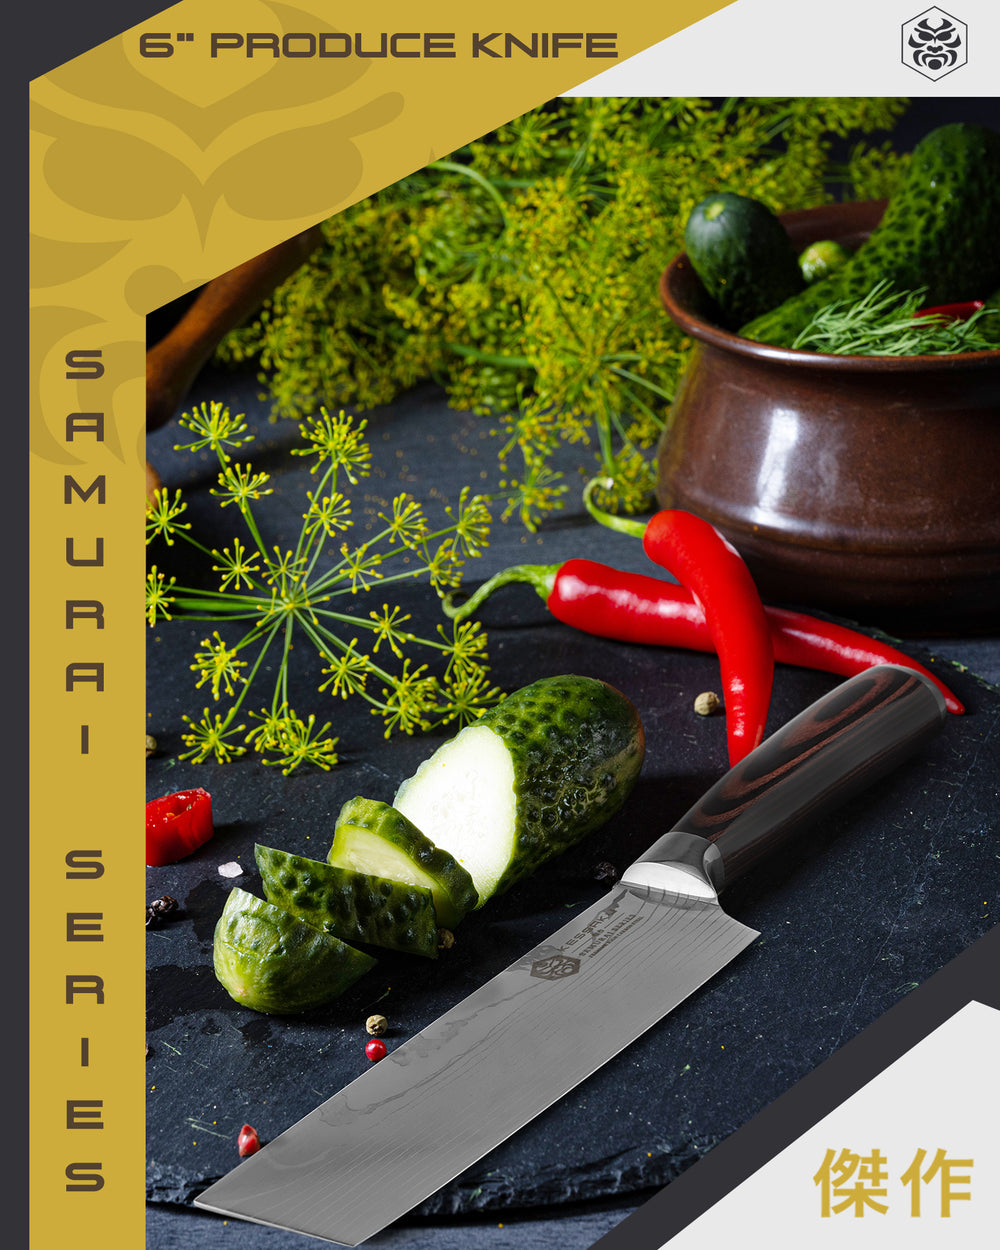 The Samurai Produce Knife with a sliced pickle, red hot peppers, and garnish on slate.